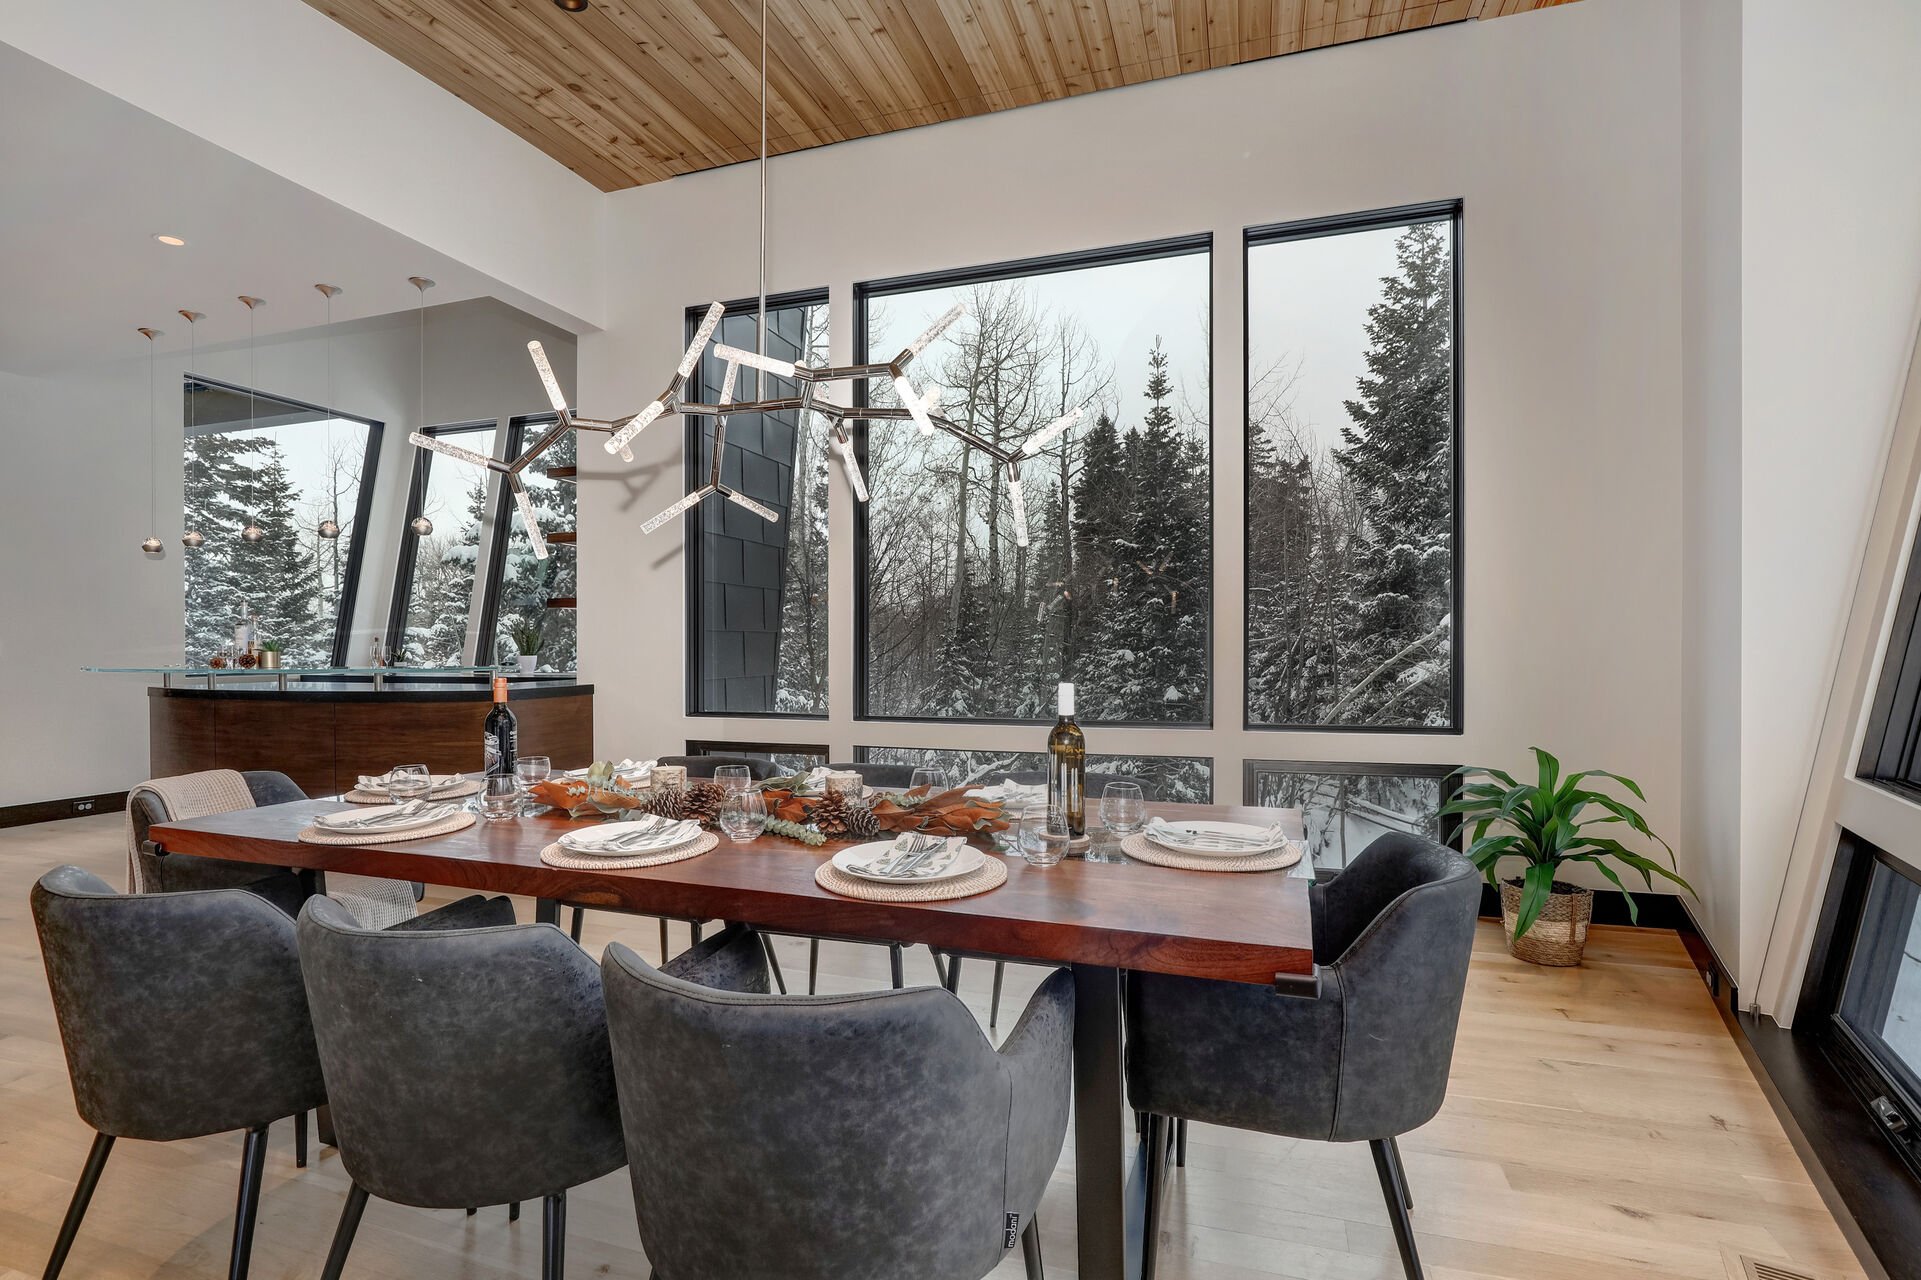 Dining Room with stunning floor to ceiling windows and seating for 8